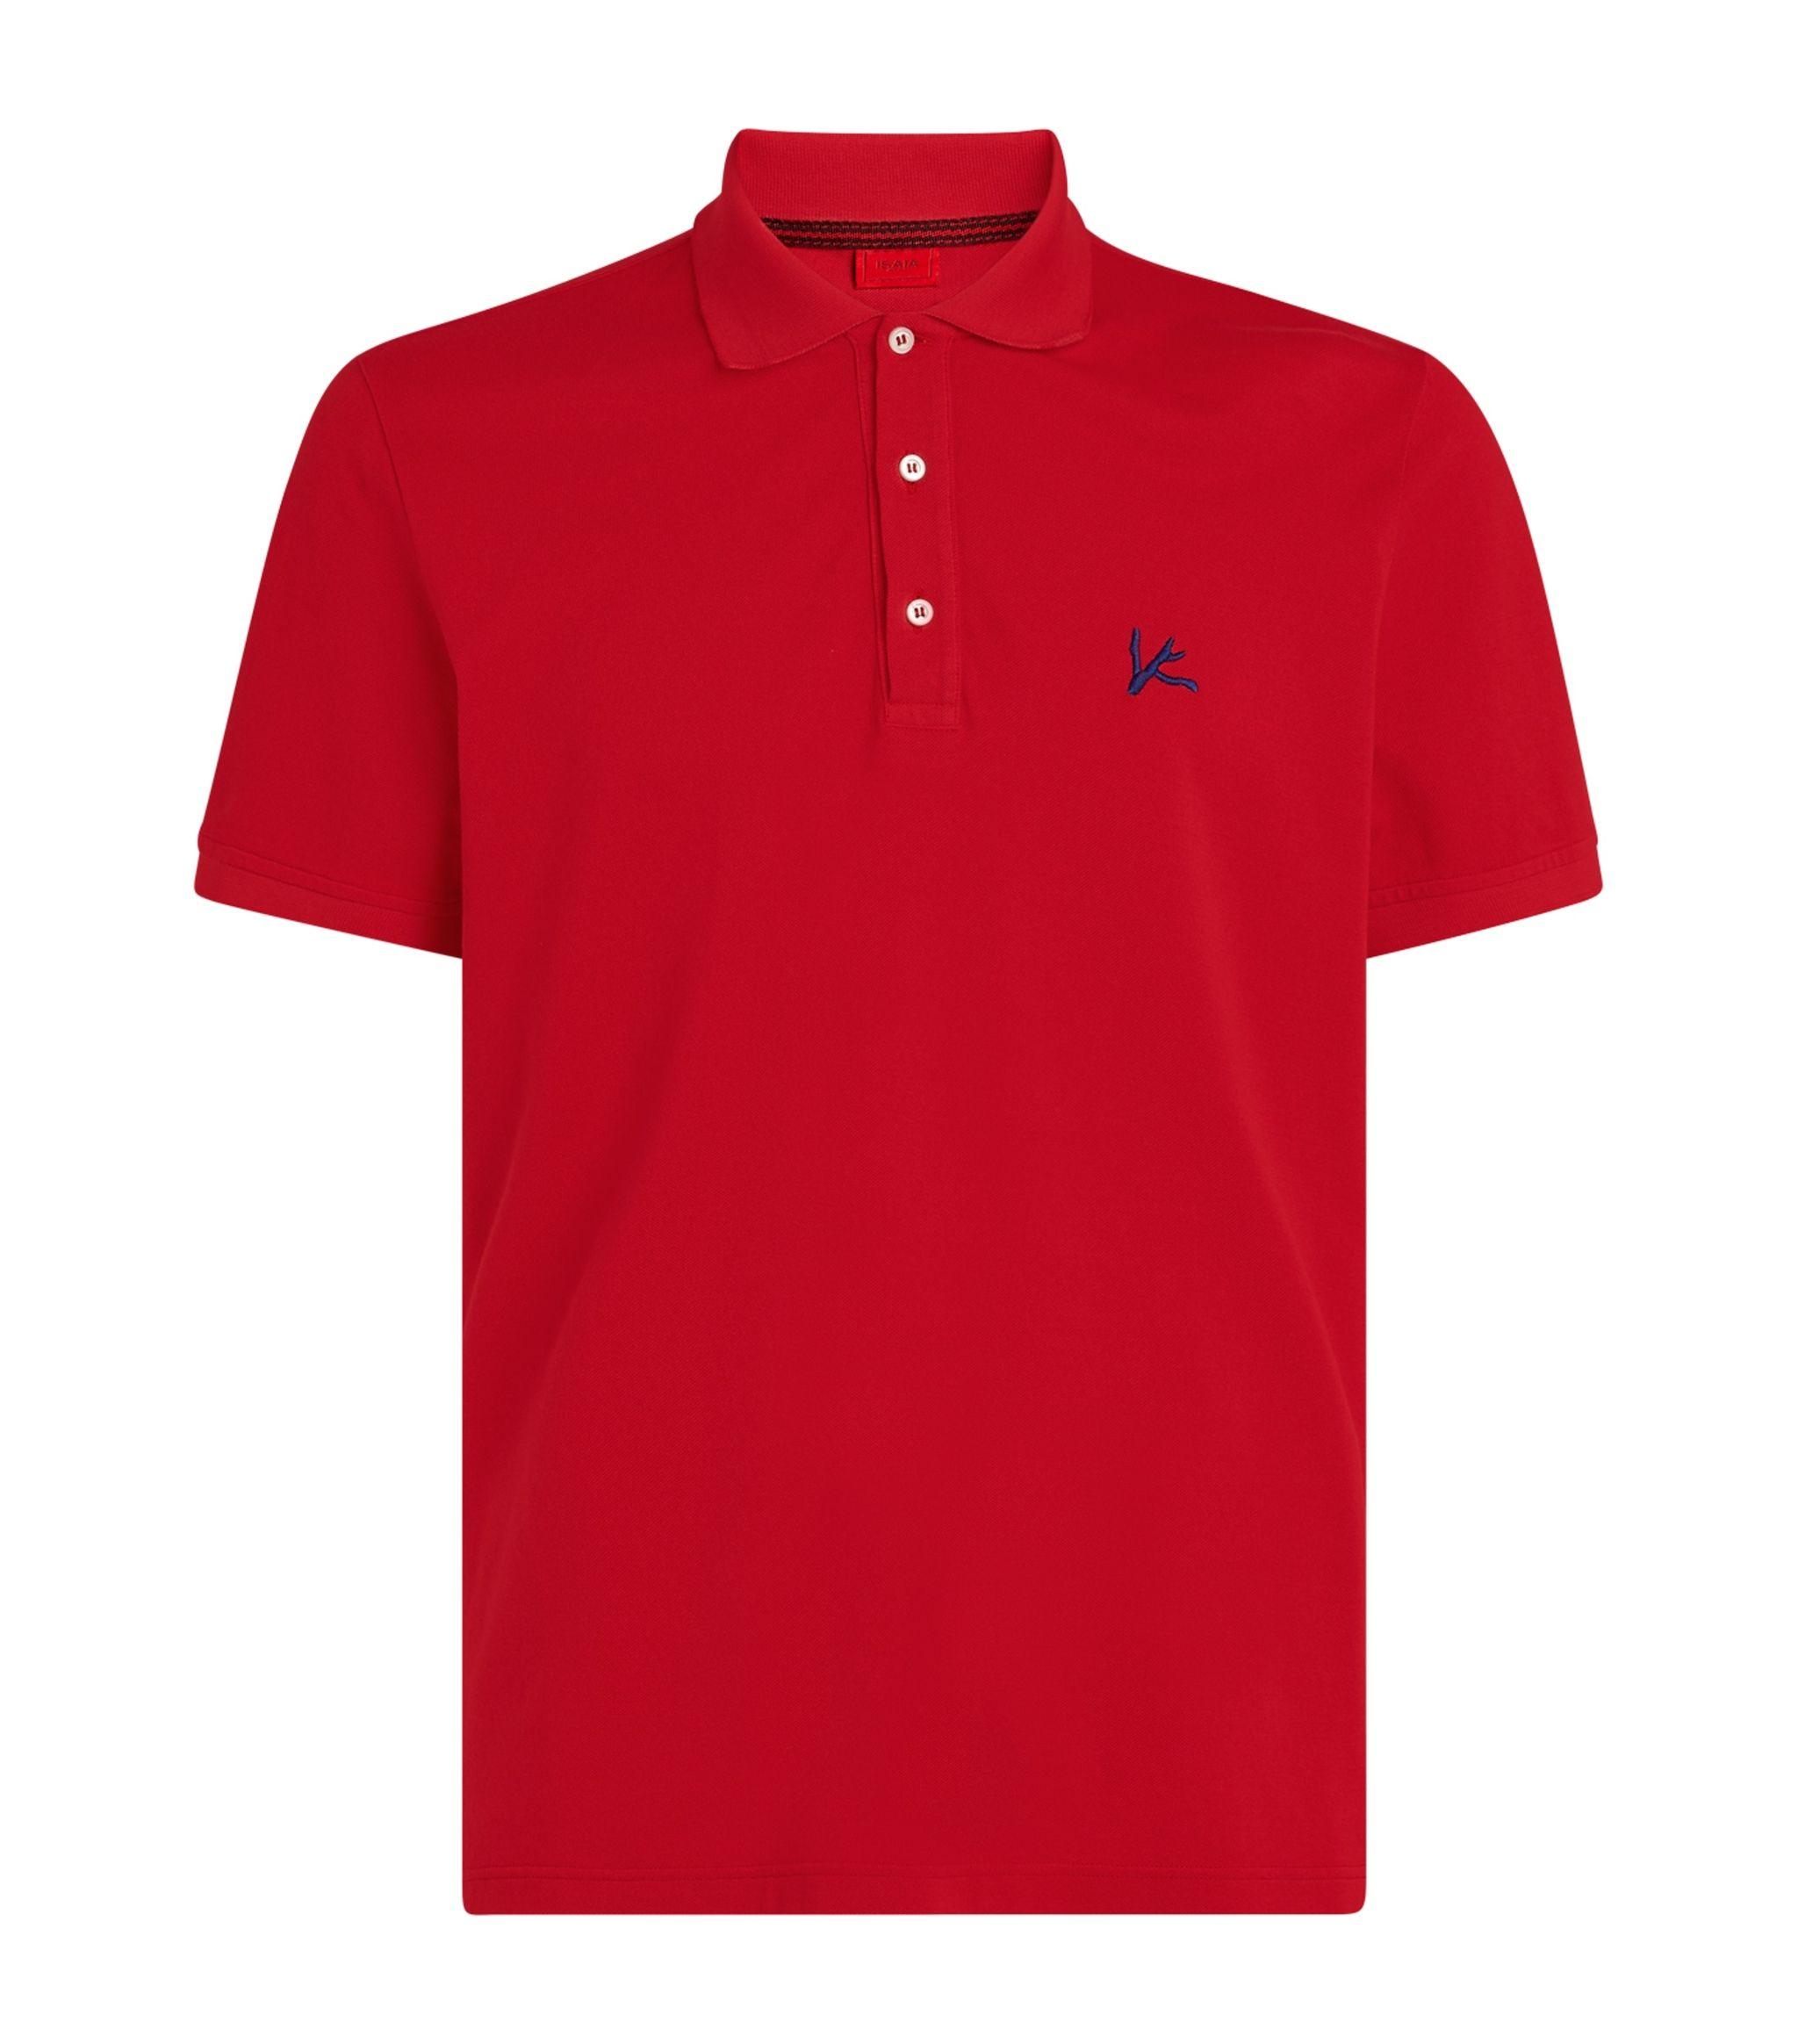 Isaia Cotton Logo Polo Shirt in Red for Men - Lyst